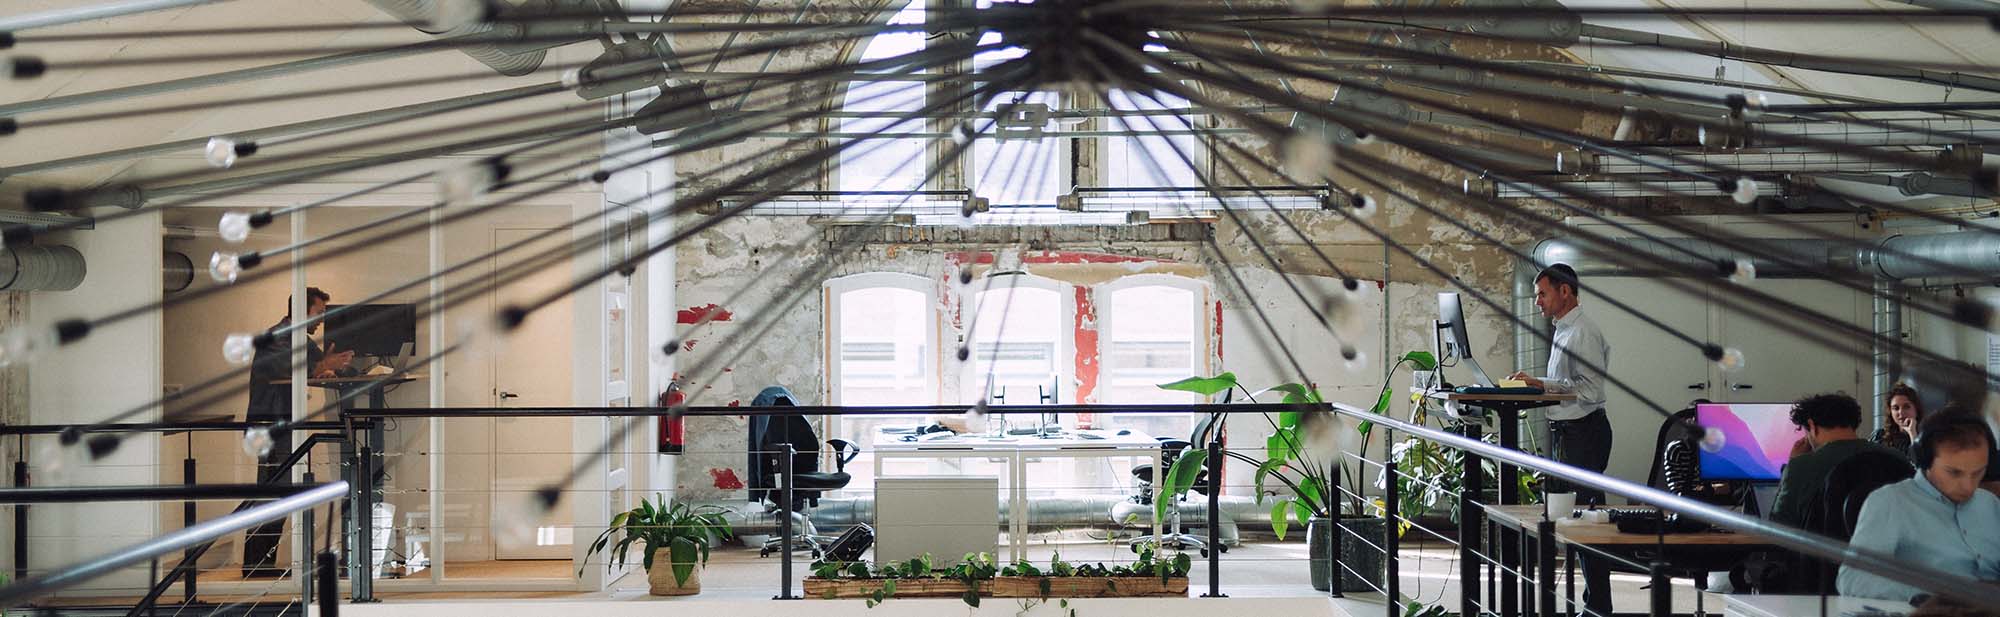 An inside view of the SkyNRG office in Amsterdam.